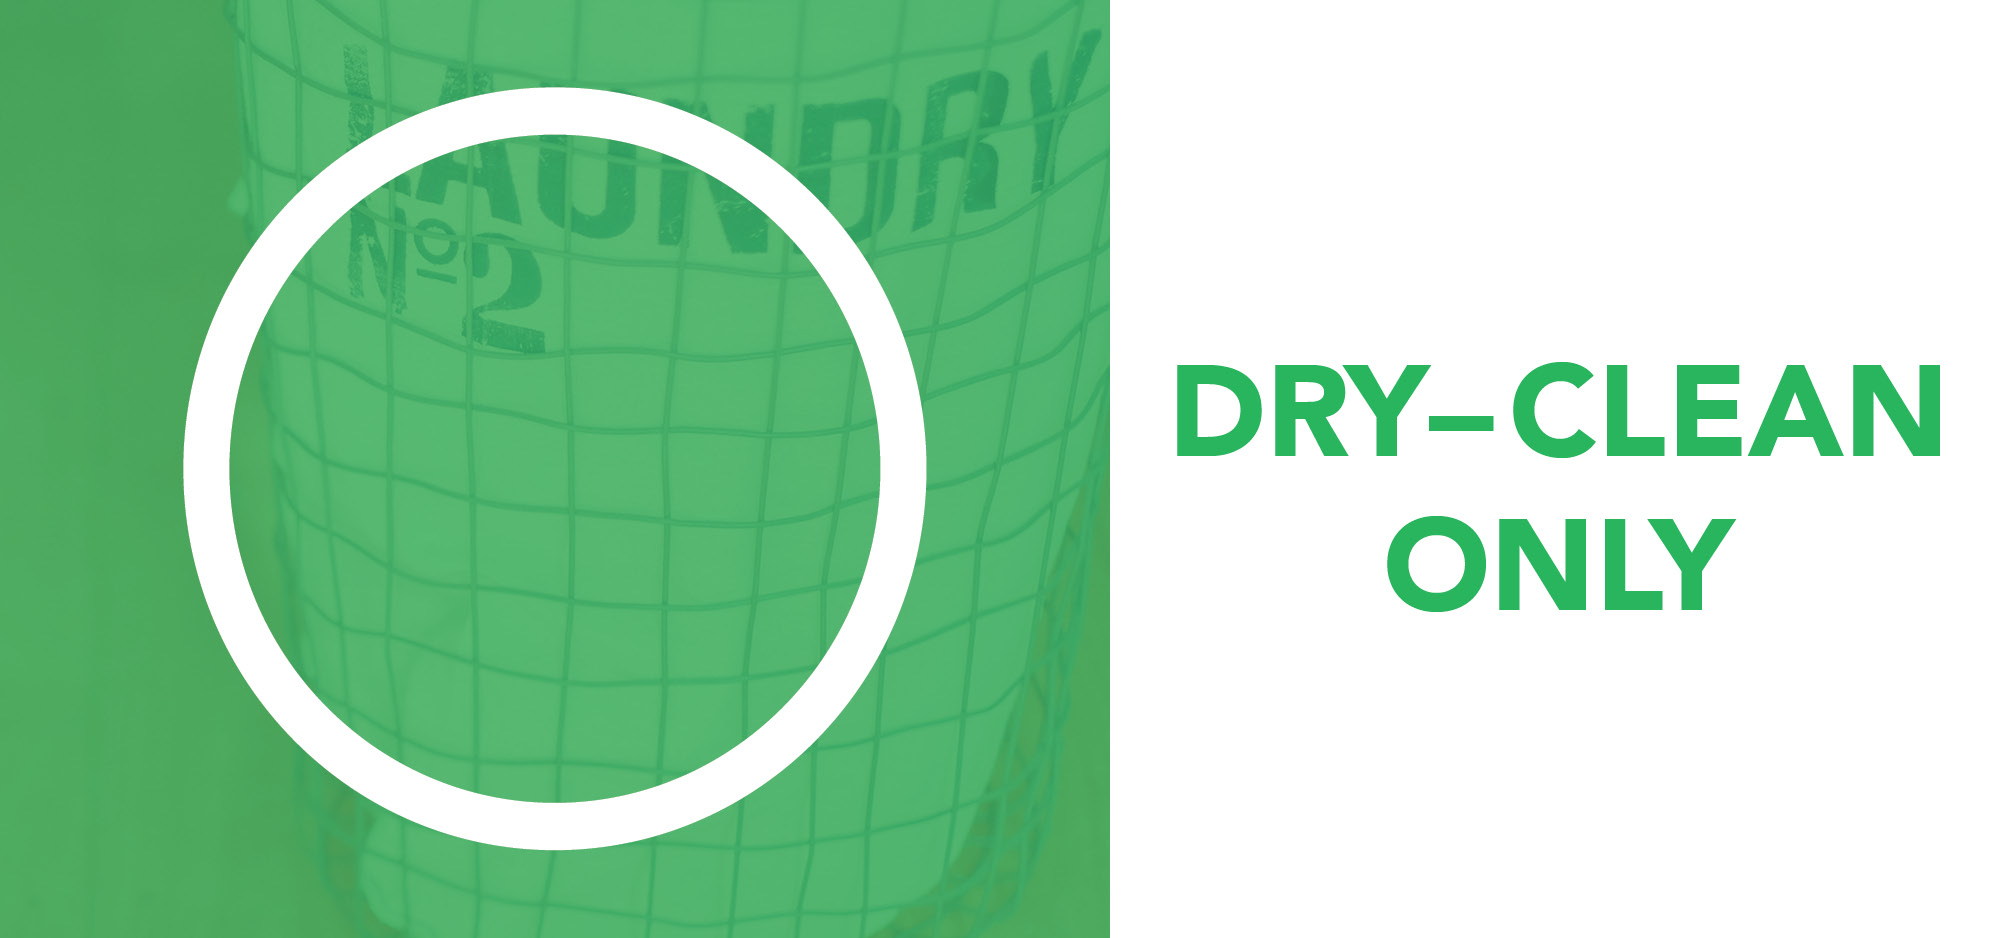 dry-clean only symbol